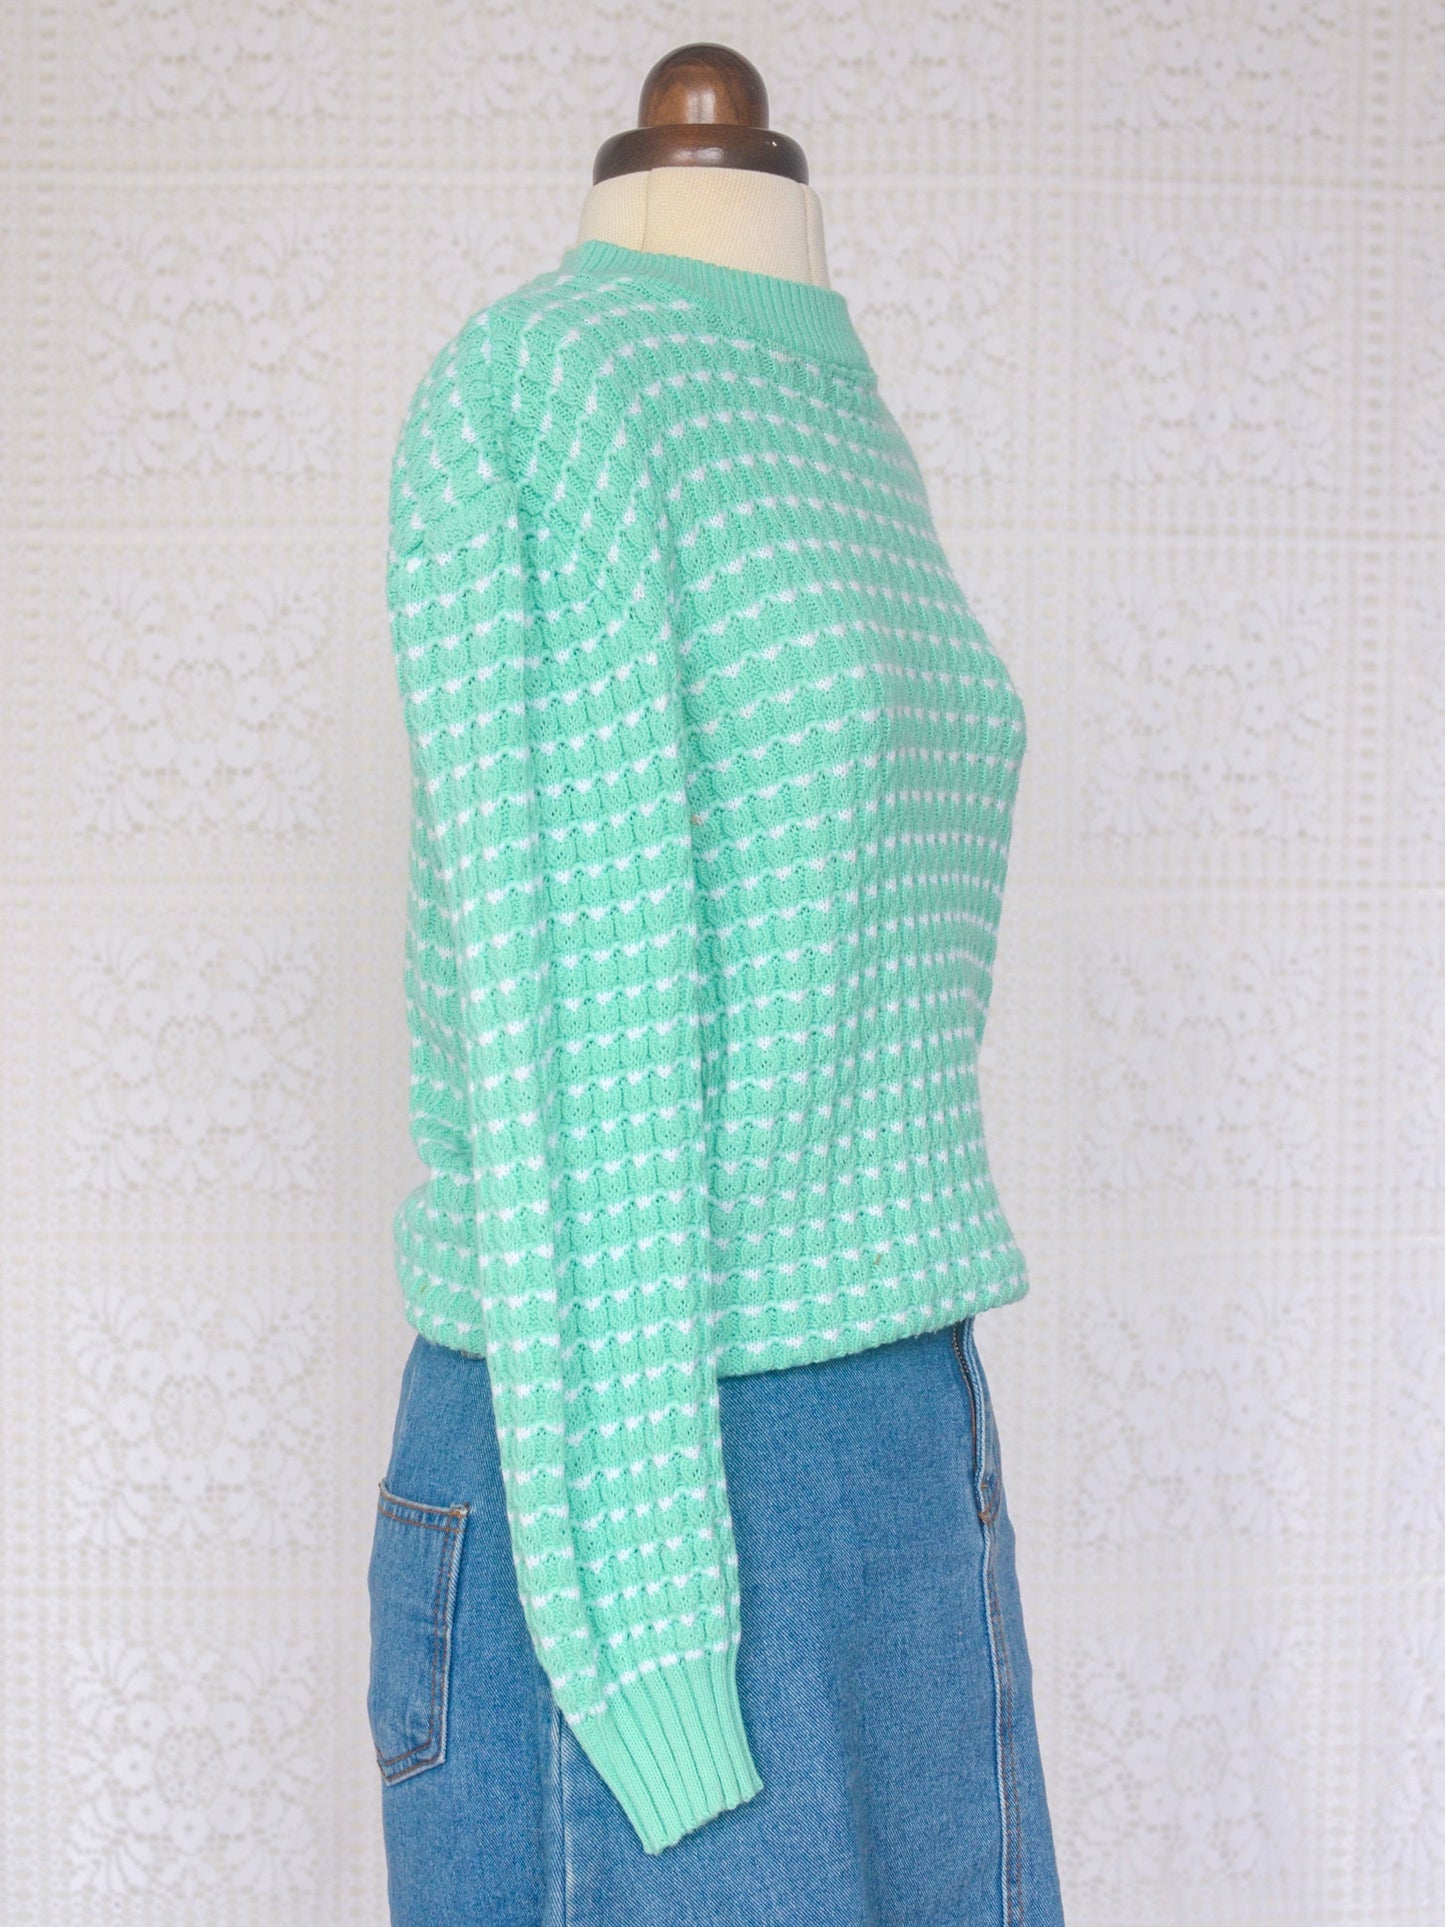 1980s style mint green and white knitted long sleeve jumper